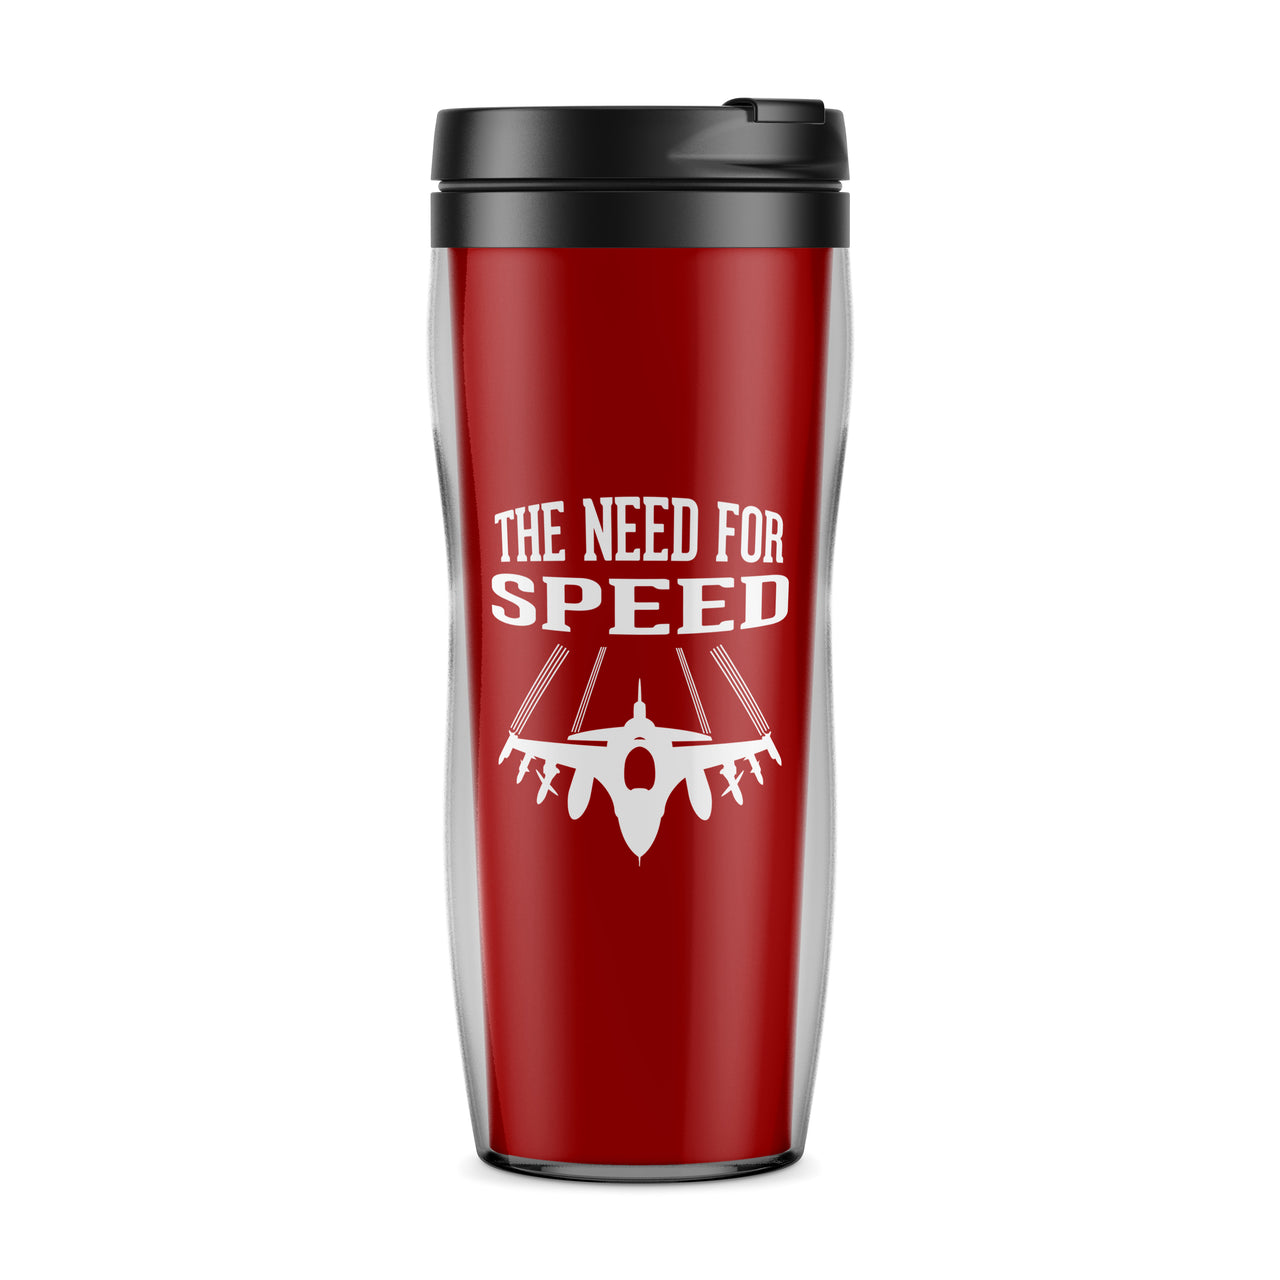 The Need For Speed Designed Travel Mugs